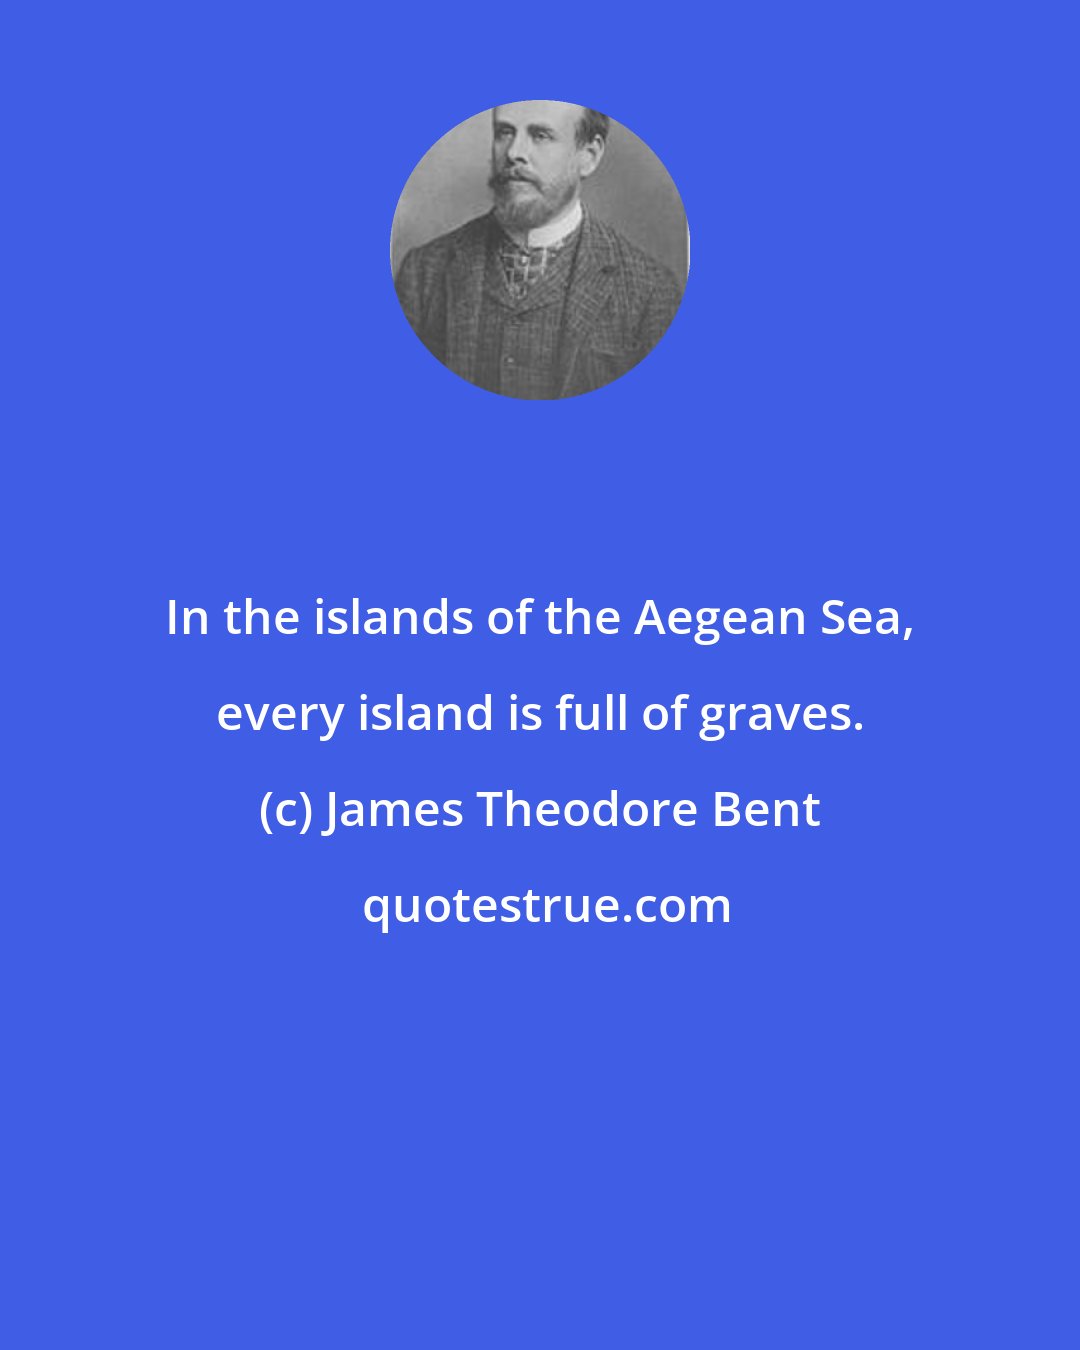 James Theodore Bent: In the islands of the Aegean Sea, every island is full of graves.